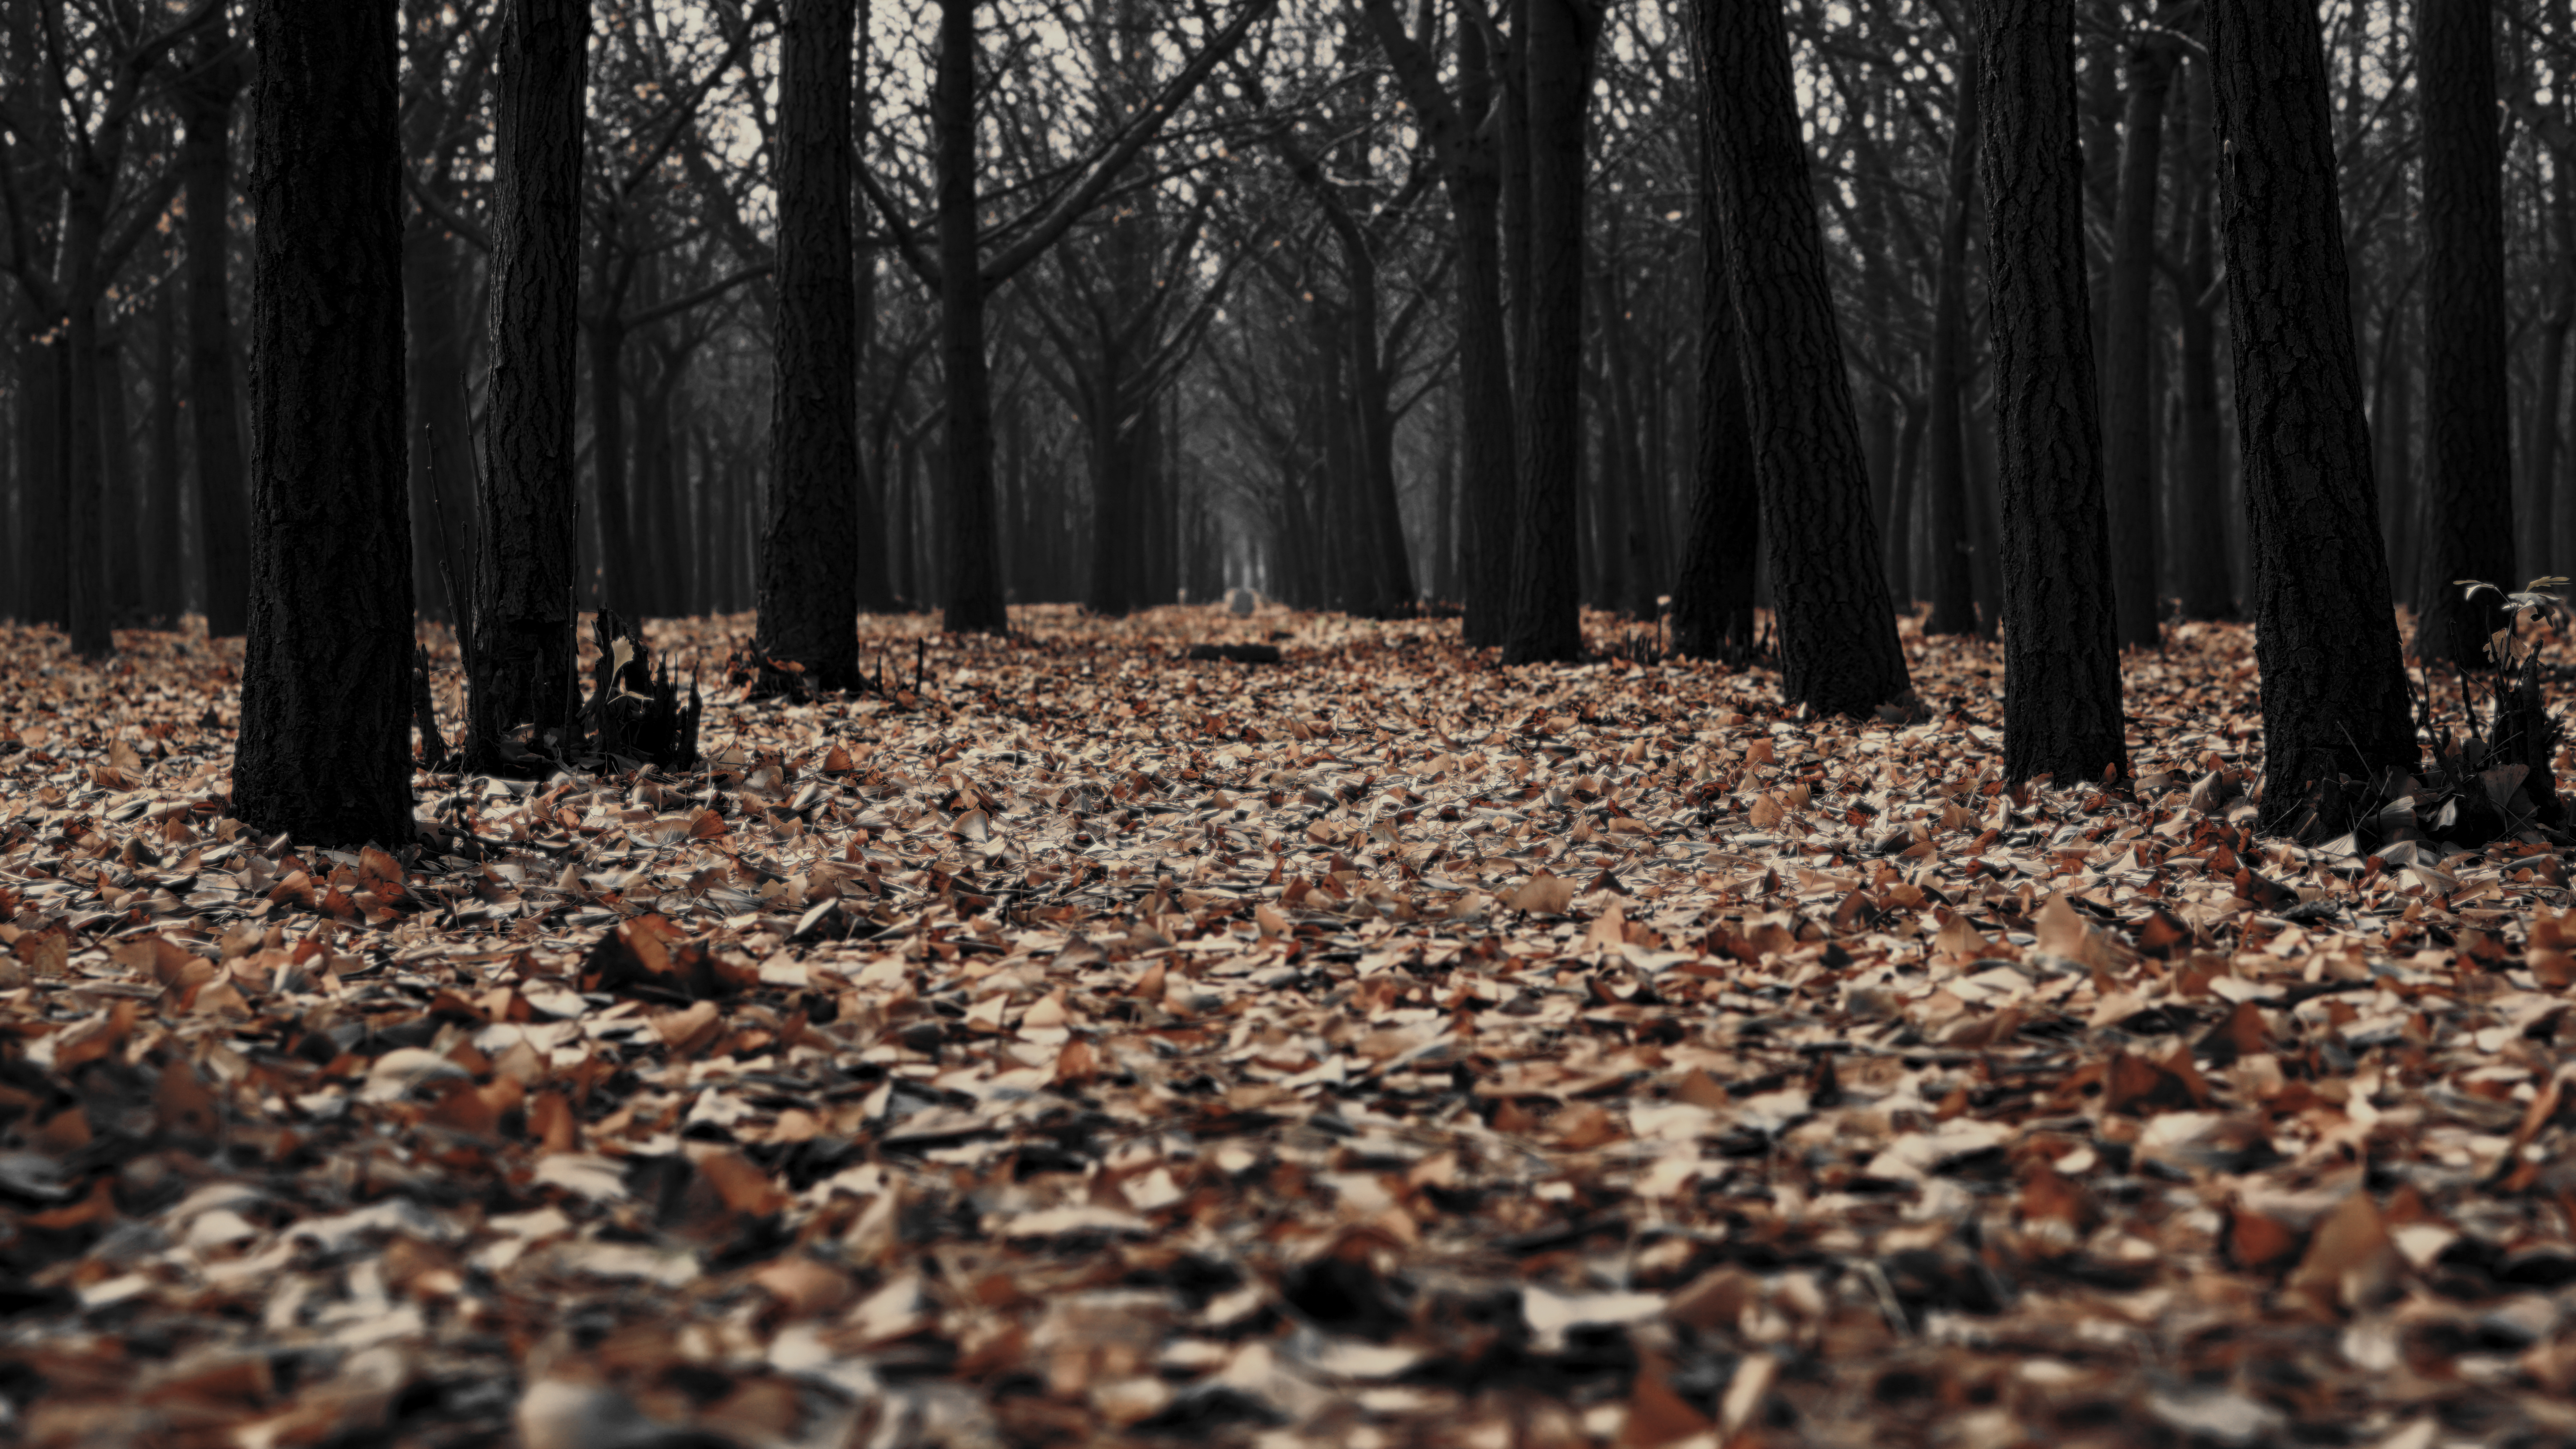 General 6000x3375 forest fall trees fallen leaves deep forest edit eerie